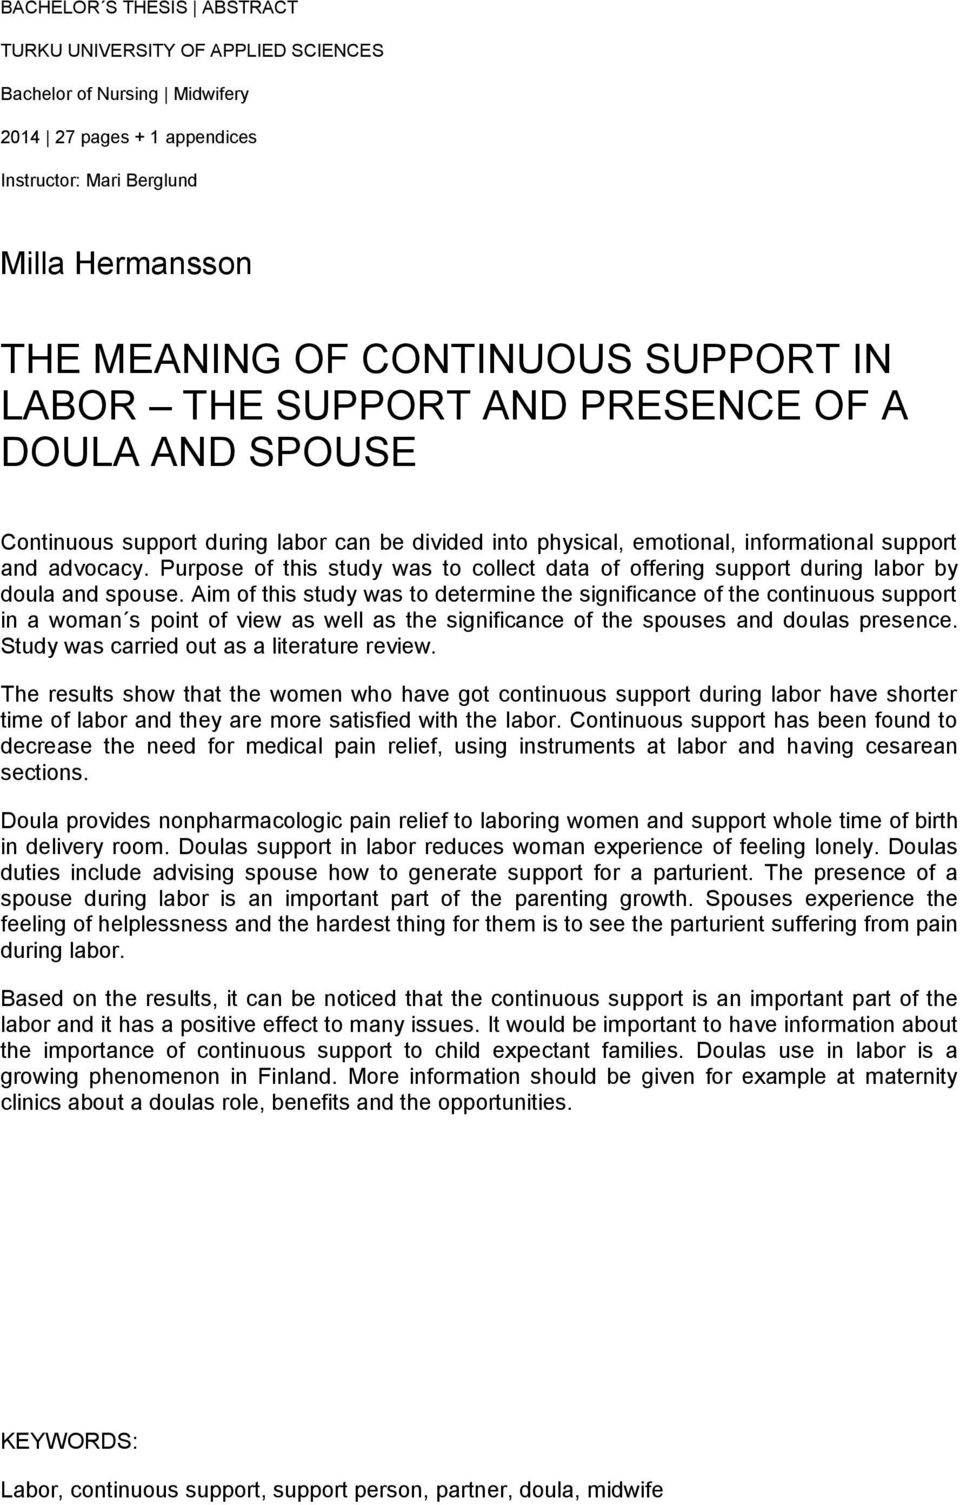 Purpose of this study was to collect data of offering support during labor by doula and spouse.